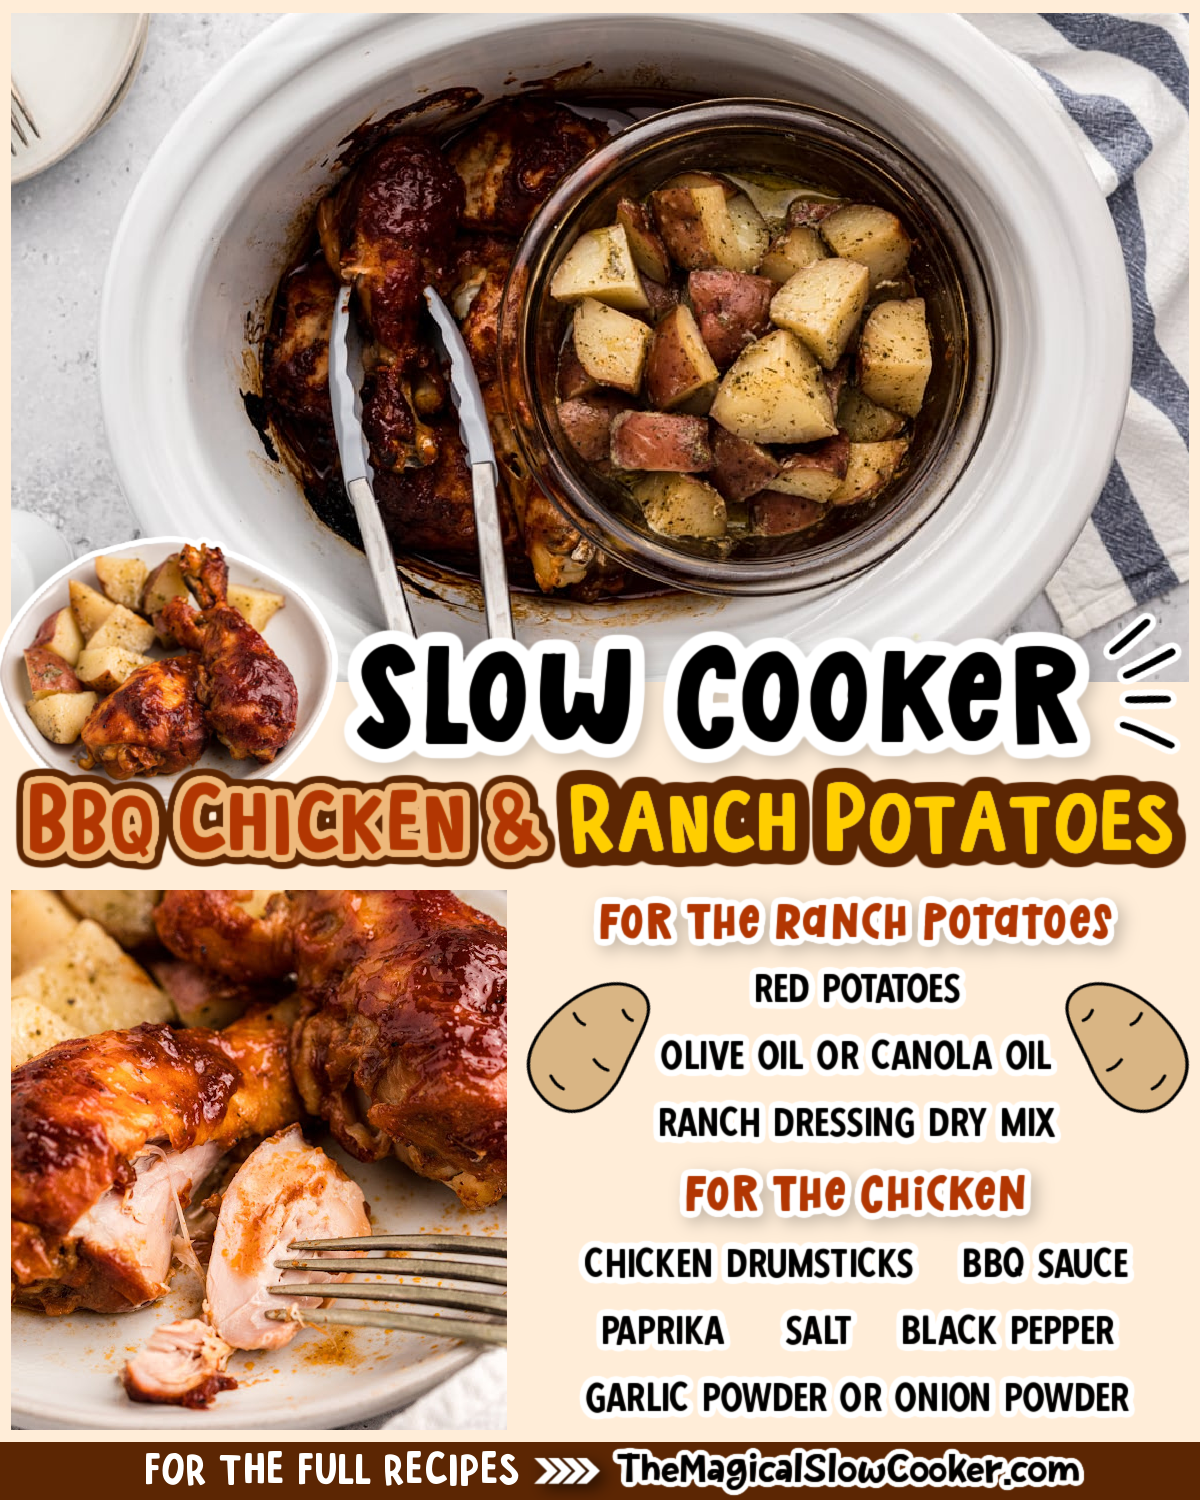 Bbq chicken and ranch potatoes images with text of what the ingredients are for facebook.